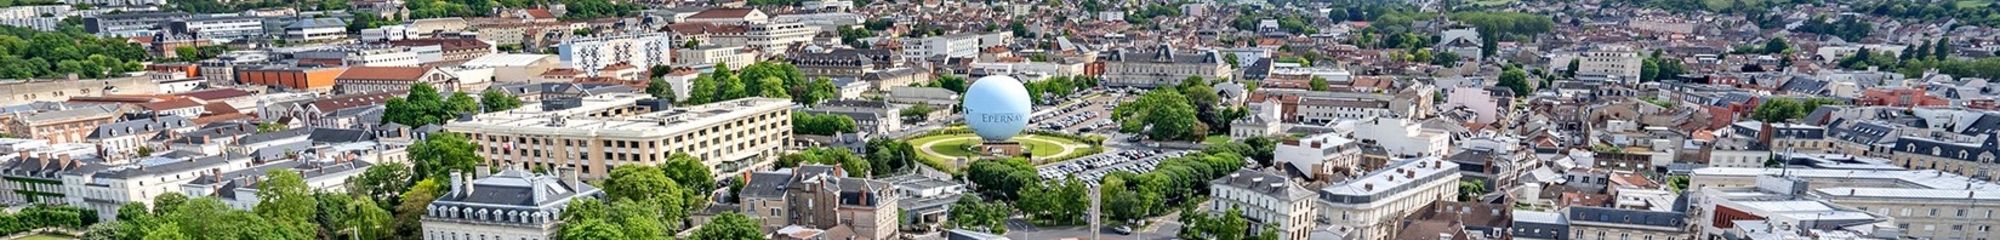 Ville EPERNAY